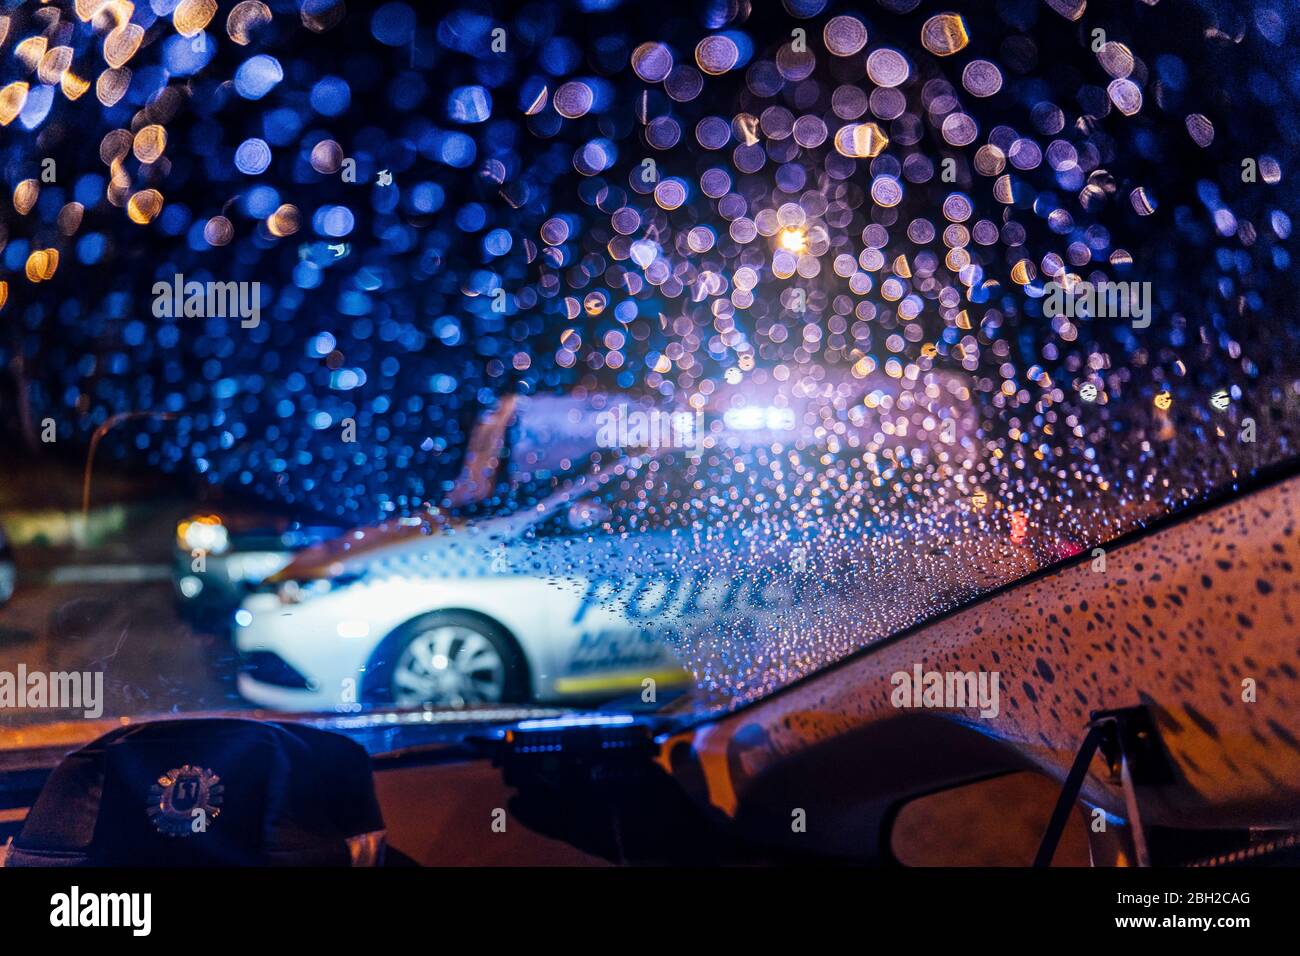 Spain, Madrid, Interior of car parked in front of patrolling police car at night Stock Photo